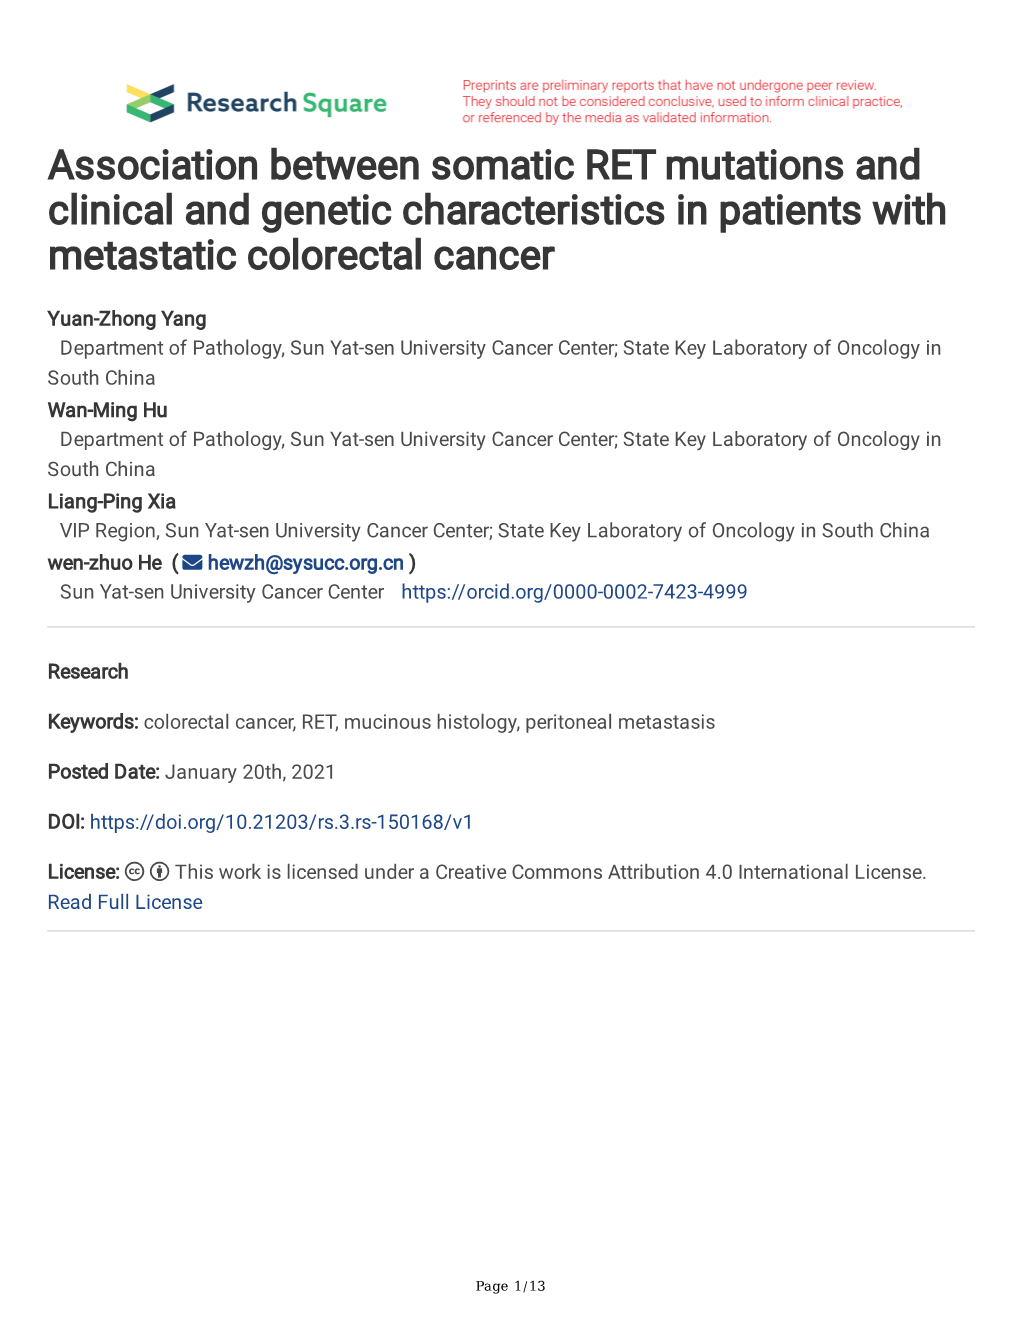 Association Between Somatic RET Mutations and Clinical and Genetic Characteristics in Patients with Metastatic Colorectal Cancer